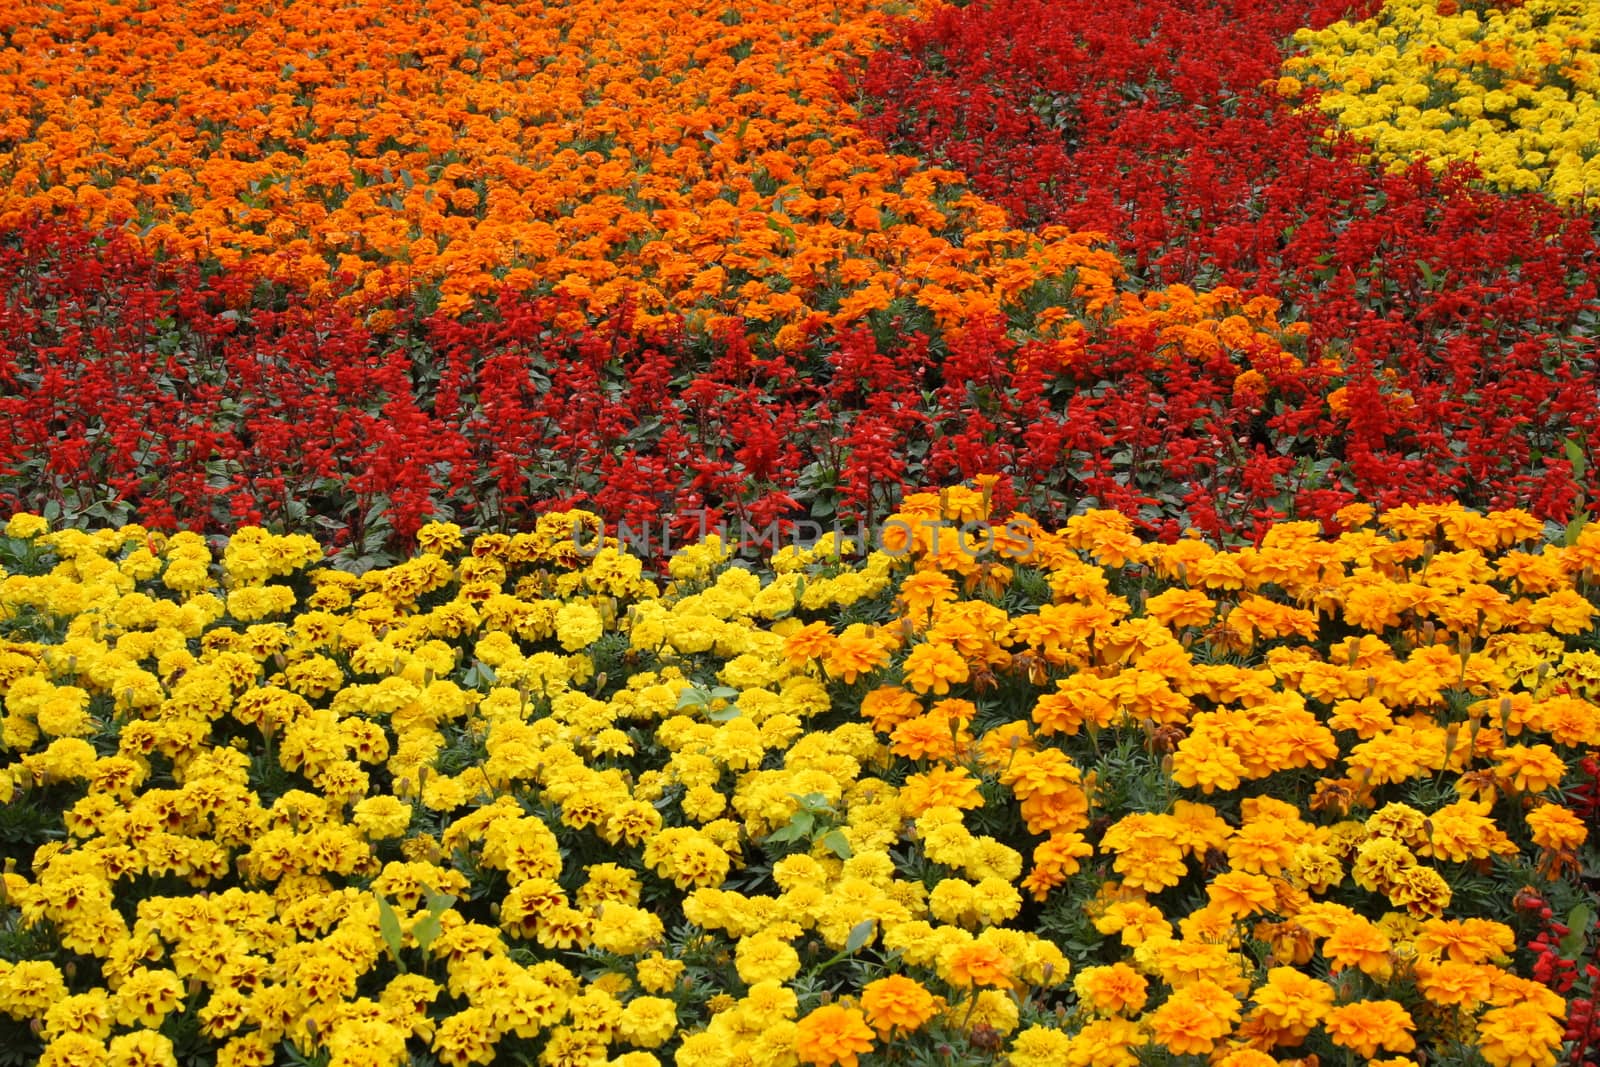 Horizontal bed of flowers by alexx60